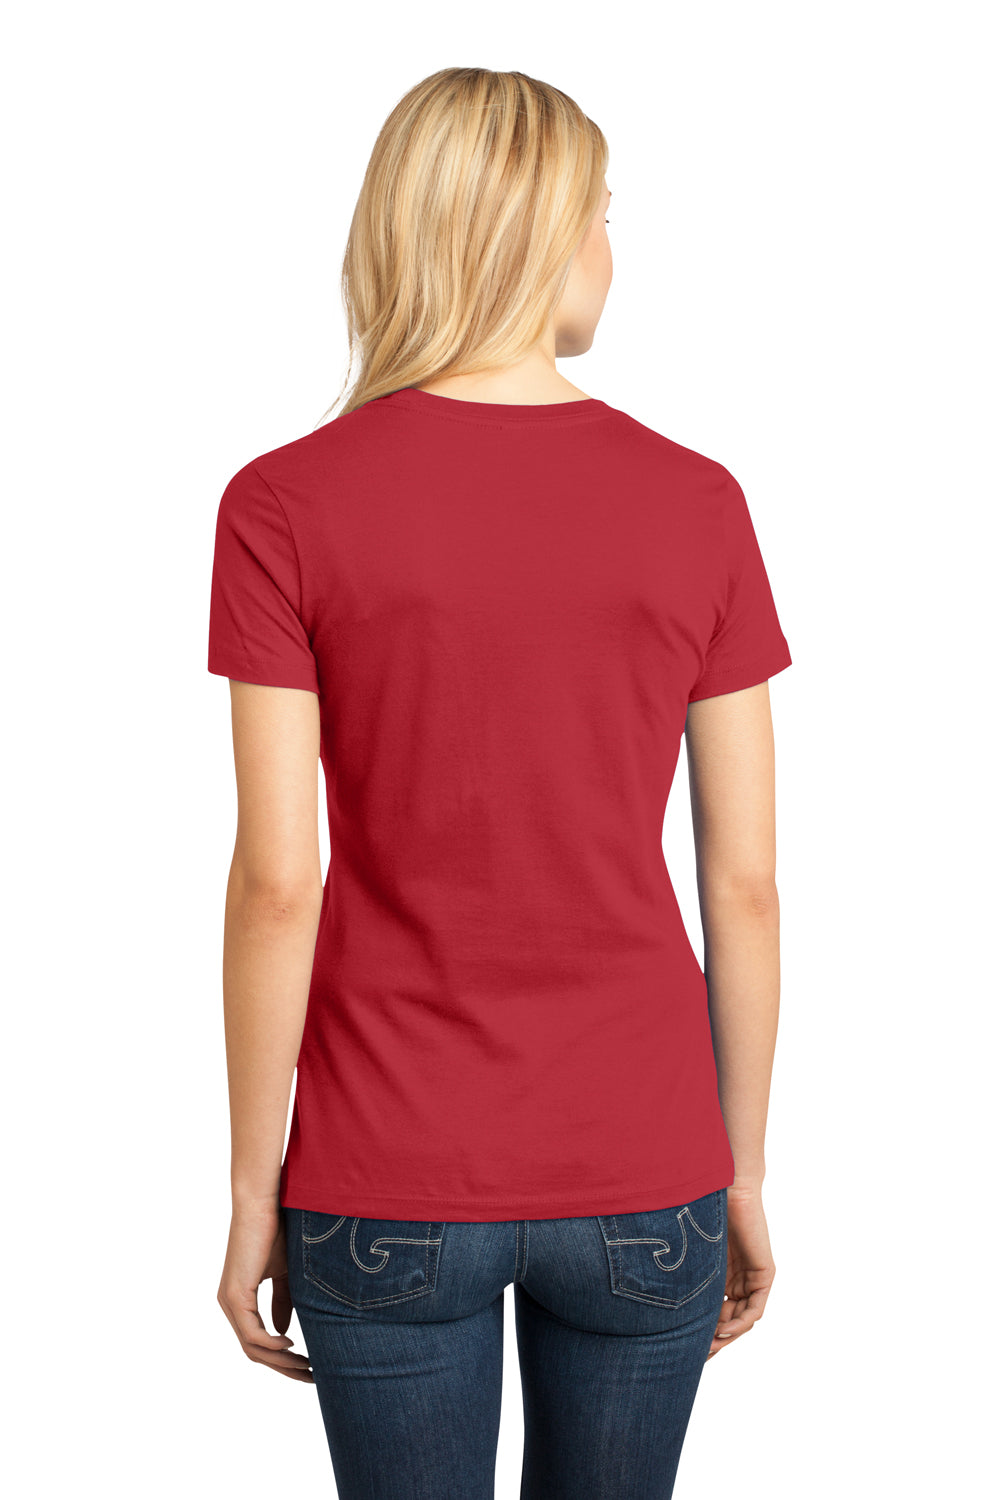 District DM104L Womens Perfect Weight Short Sleeve Crewneck T-Shirt Red Back